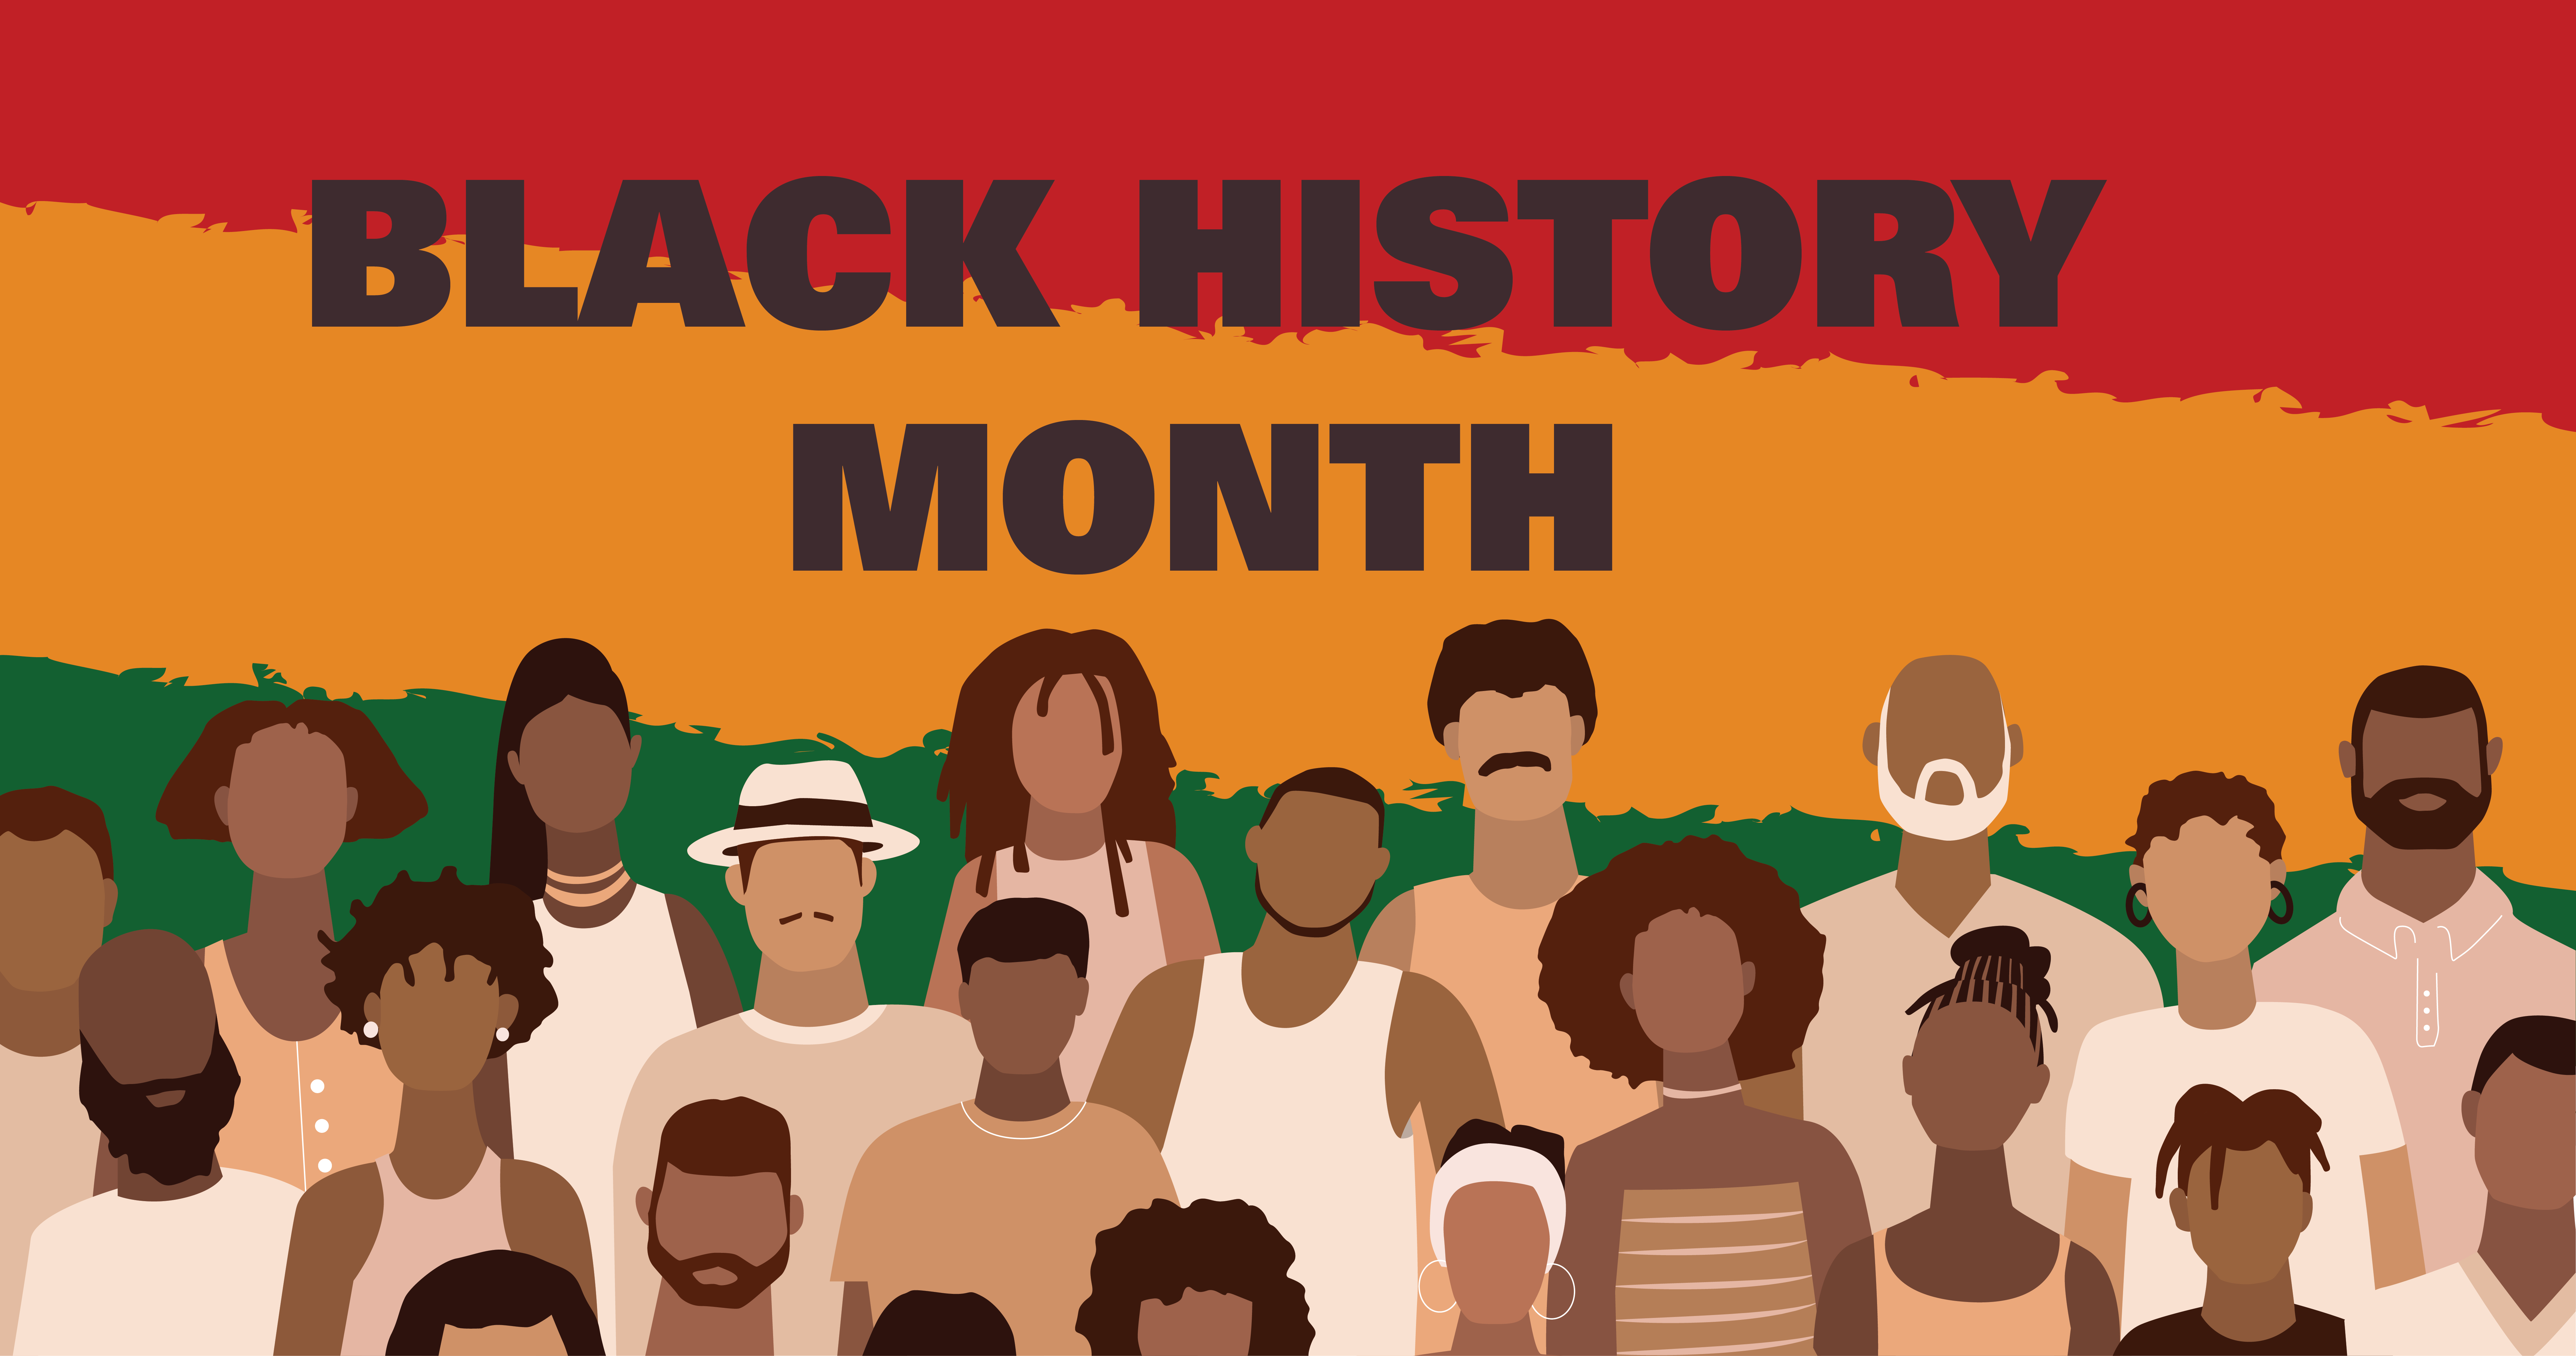 the background has large strips of red, yellow and green. in black text are the words 'black history month'. several illustrated Black people stand in front, with different body types, hair textures, and skin tones